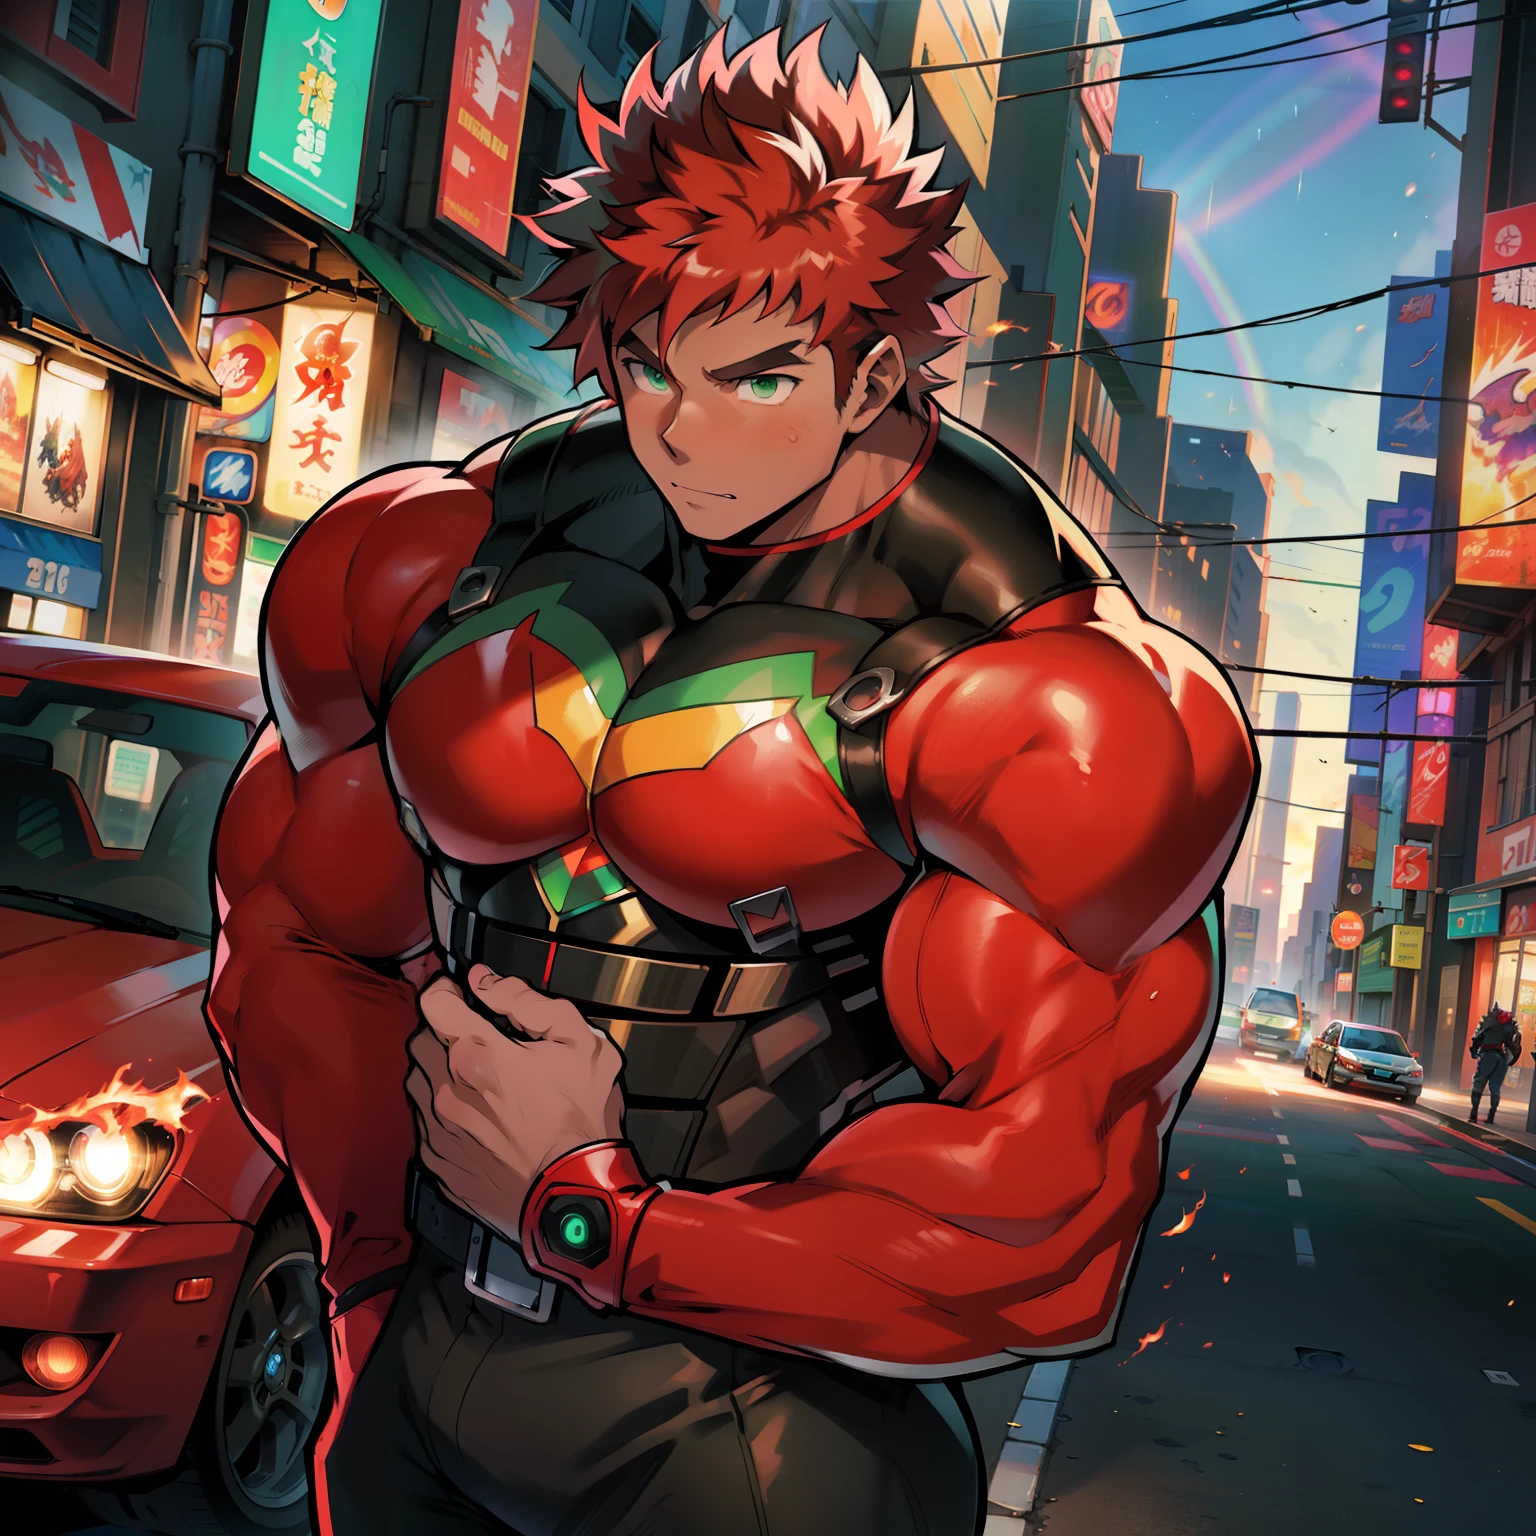 ((Anime style art)), Extremely muscular masculine character, tan skin,  rainbow hair,  green eyes s, bodybuilder body, tight red corset, ((flaming hands)) futuristic crystal rustic cityscape, Busy route, Buildings, person
AS & Vehicles. Main character from the anime, suoerhery, Nice image, Hard drive, 4k, Main character